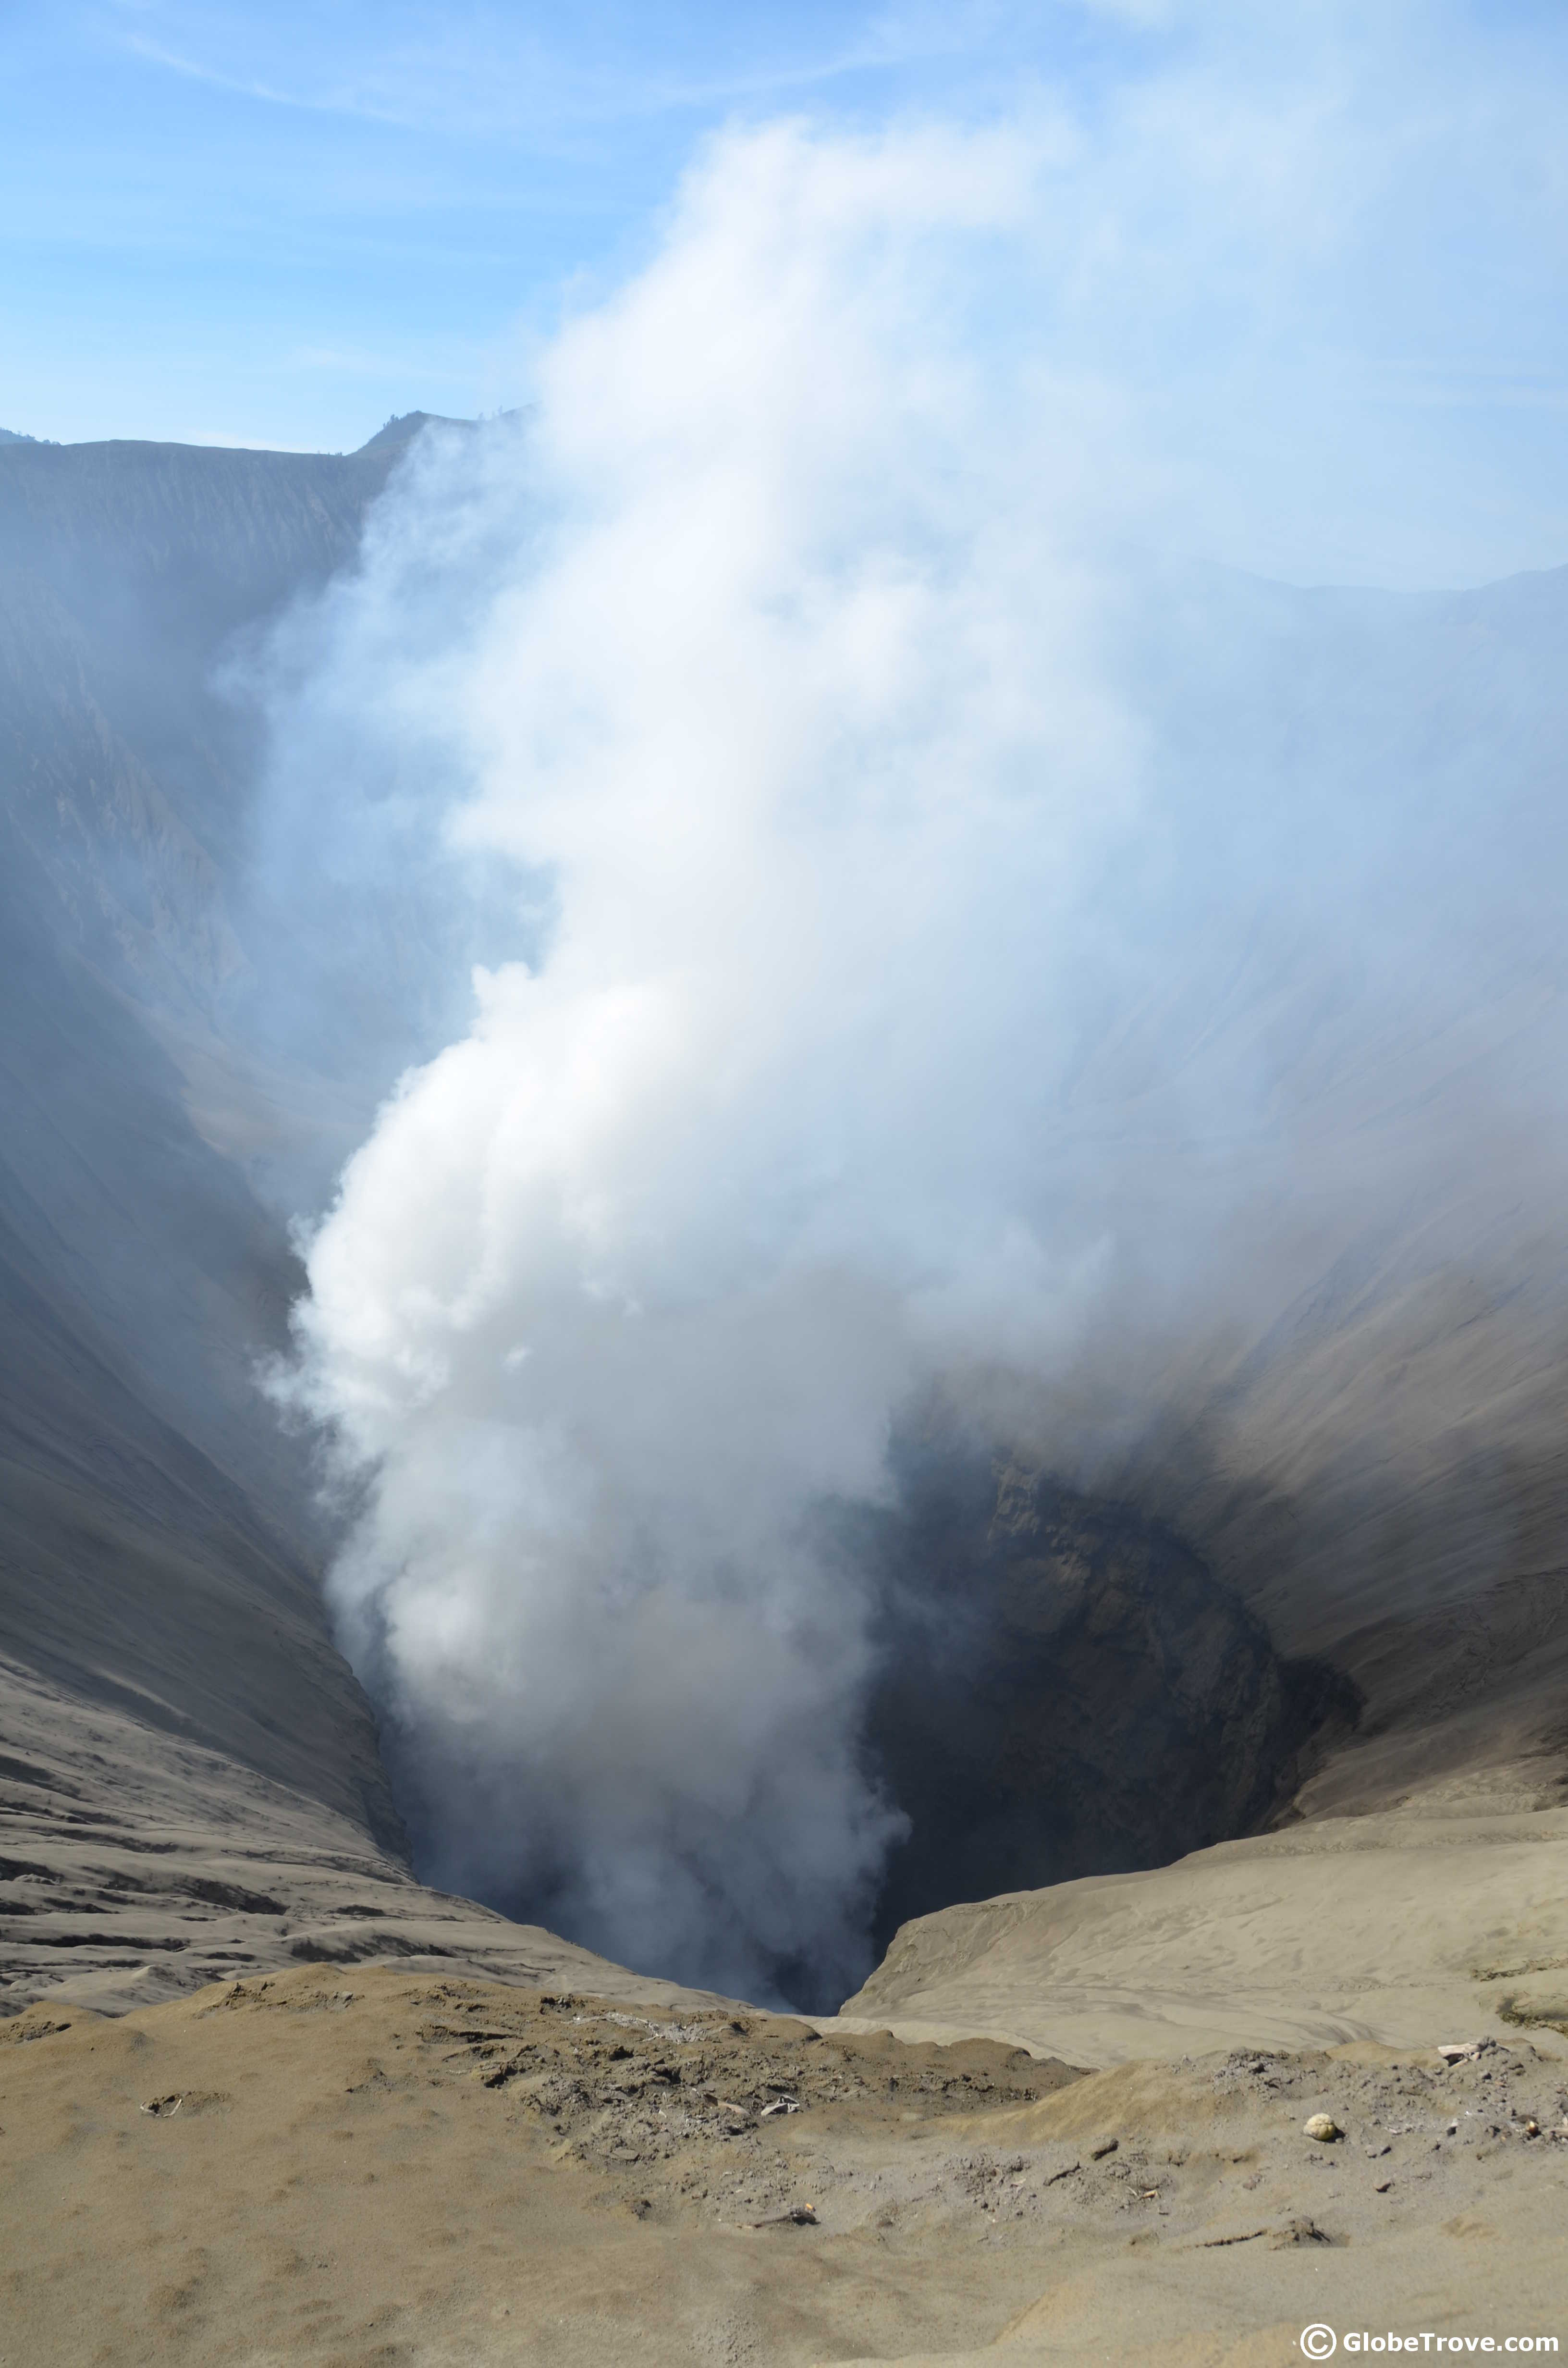 Your self guided Mount Bromo tour will take you right to the mouth of the volcano!